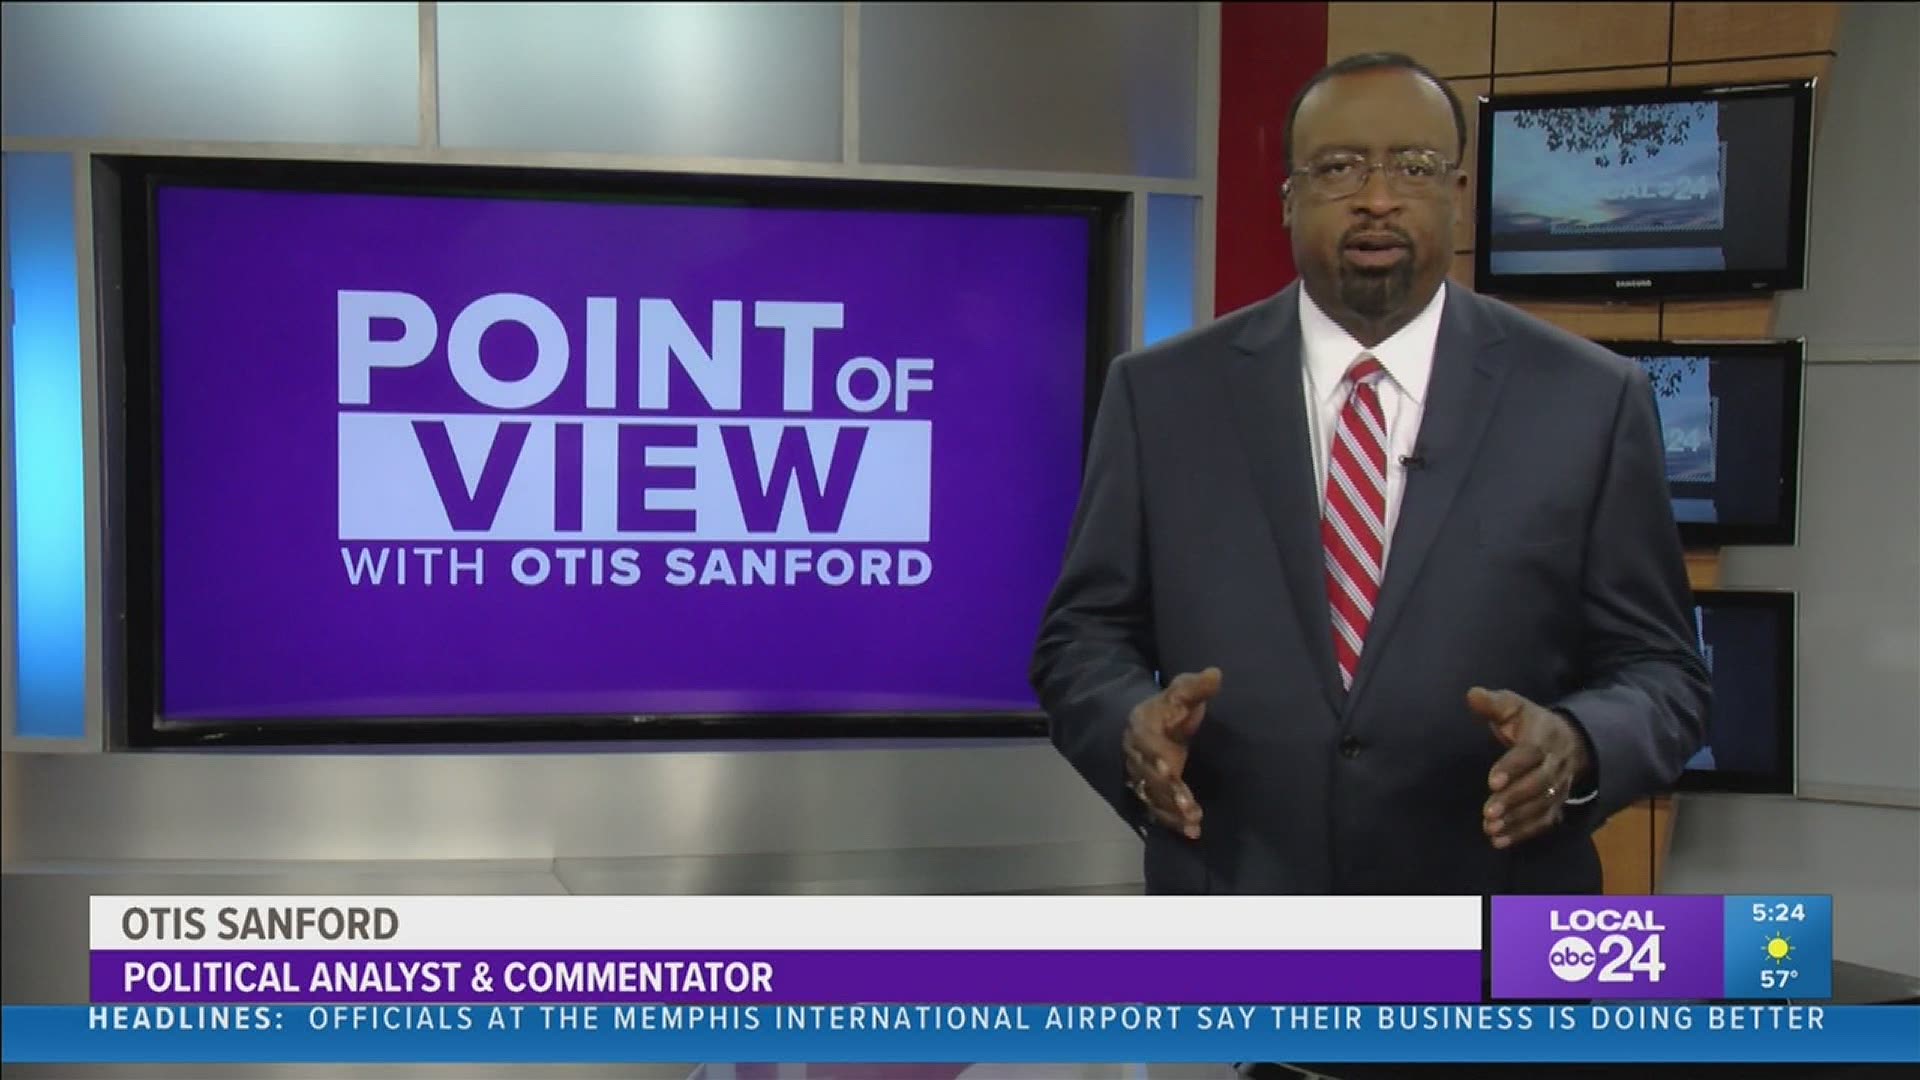 Local 24 News political analyst and commentator Otis Sanford shares his point of view on COVID-19 clusters in Shelby County.